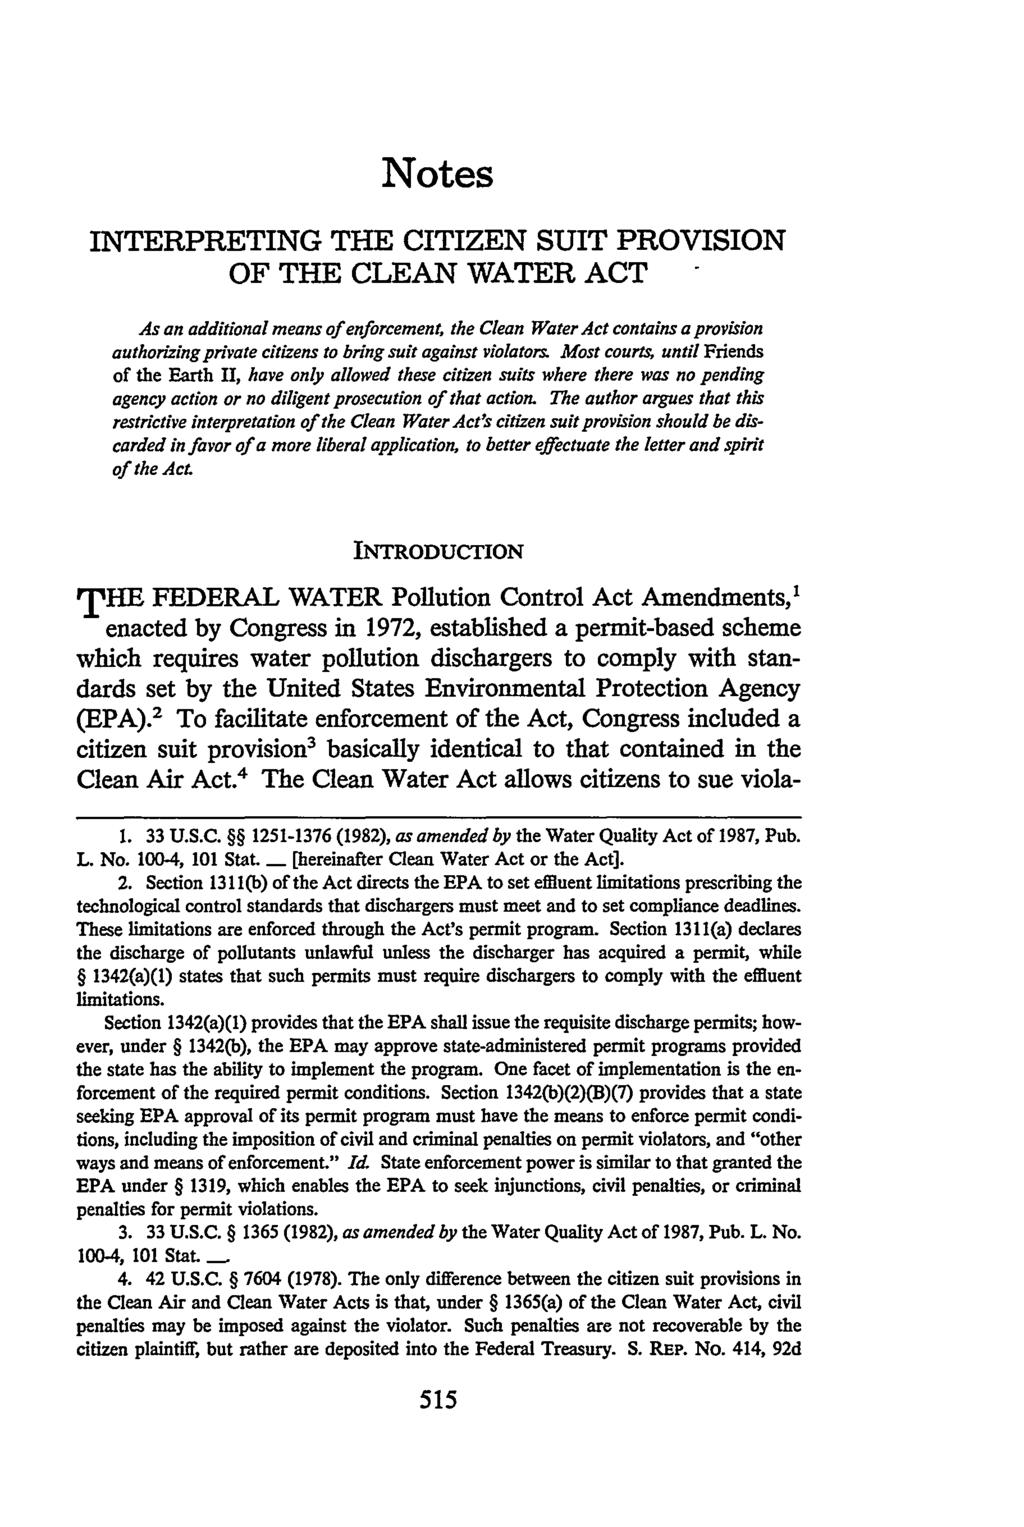 Notes INTERPRETING THE CITIZEN SUIT PROVISION OF THE CLEAN WATER ACT As an additional means of enforcement, the Clean Water Act contains a provision authorizing private citizens to bring suit against